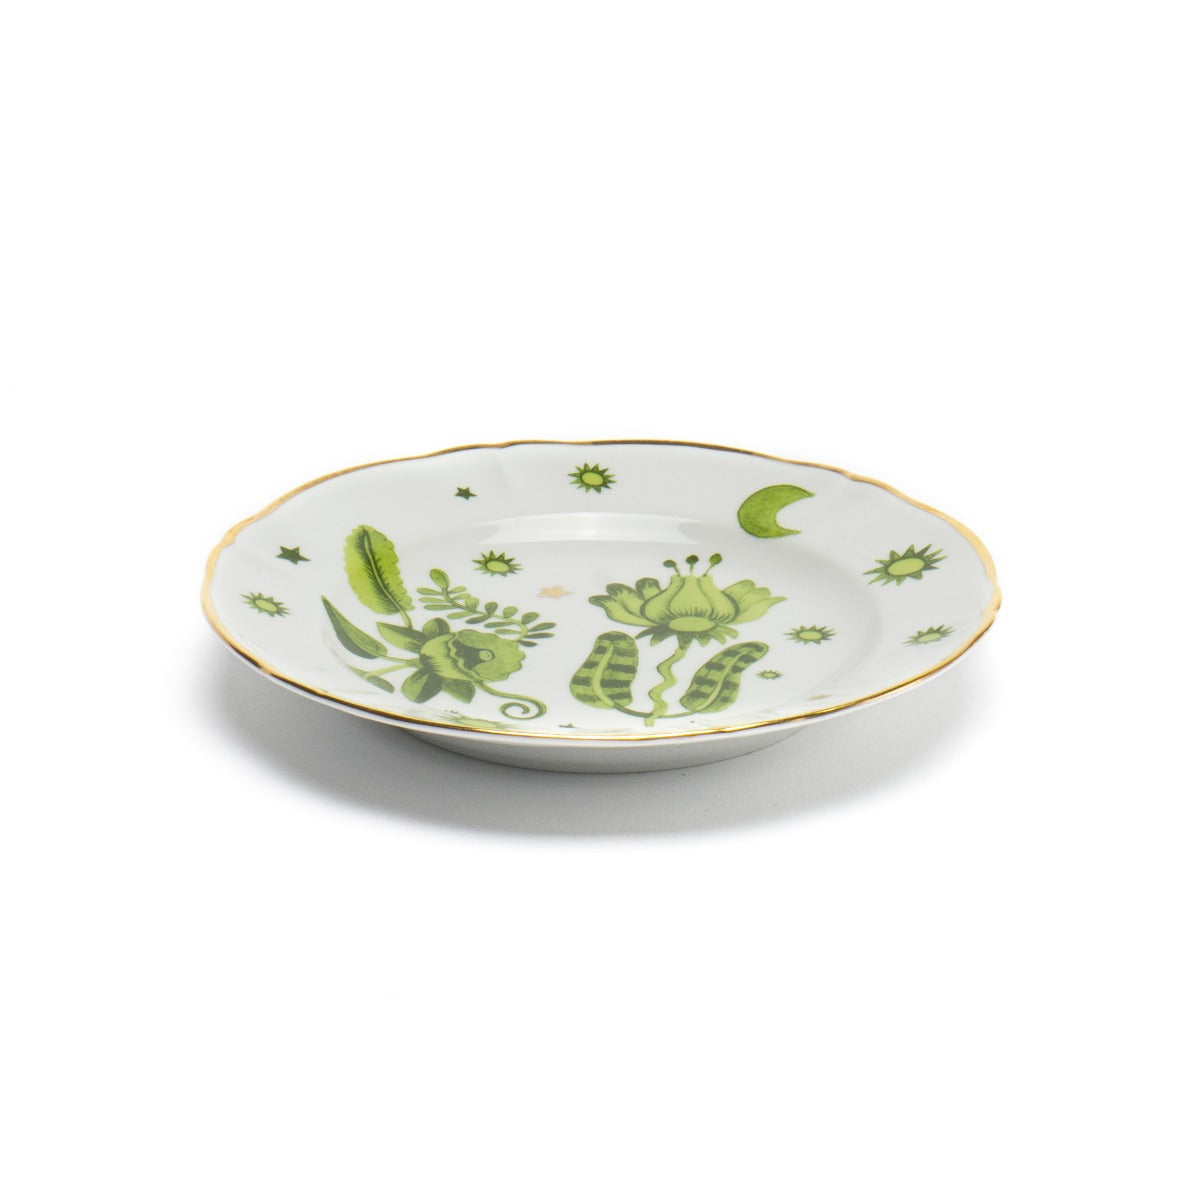 Green Floral Fruit Plate